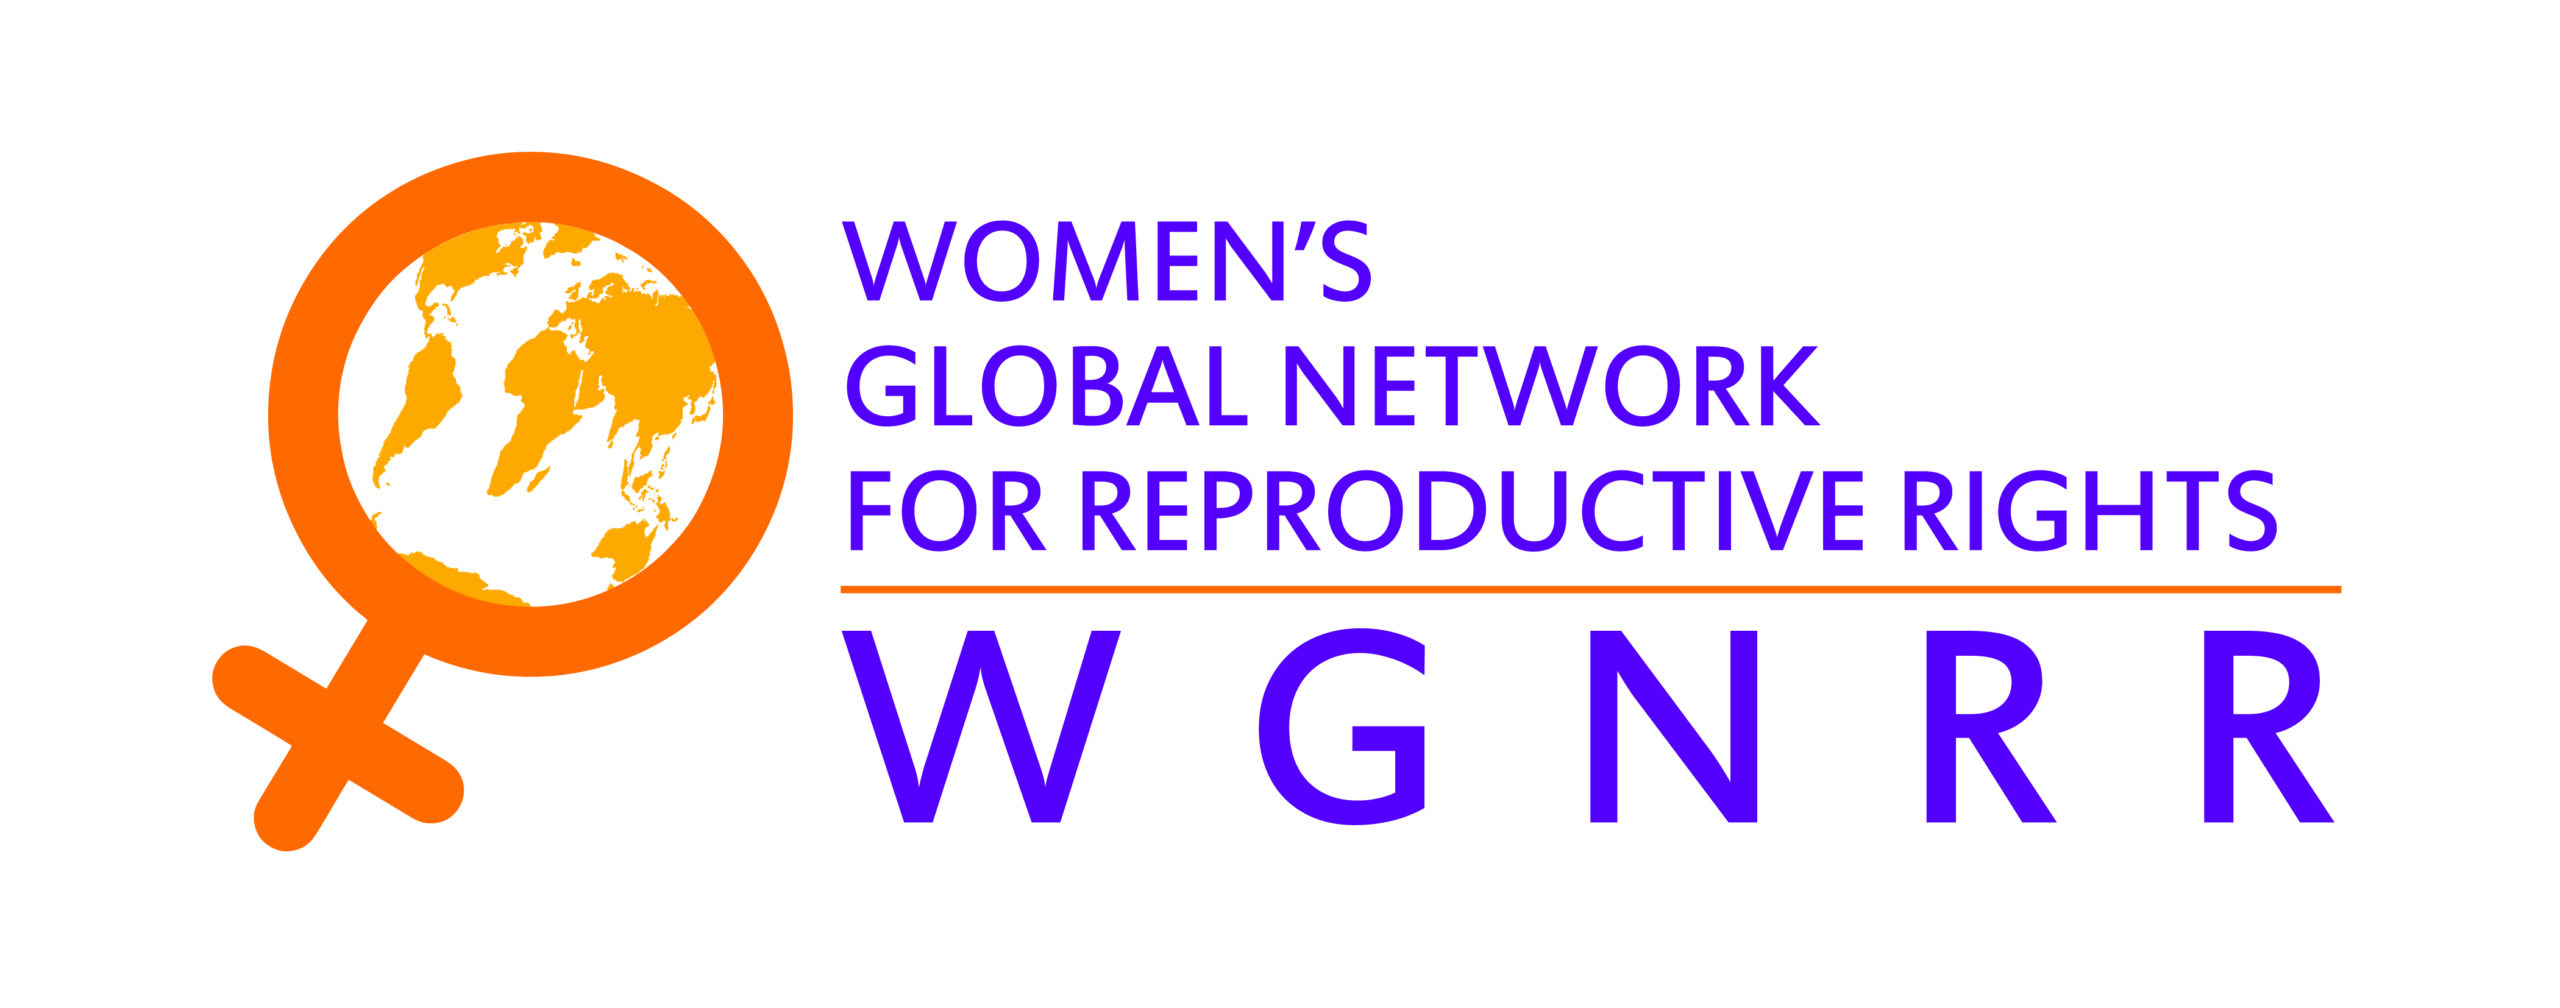 WGNRR - Women's Global Network for Reproductive Rights